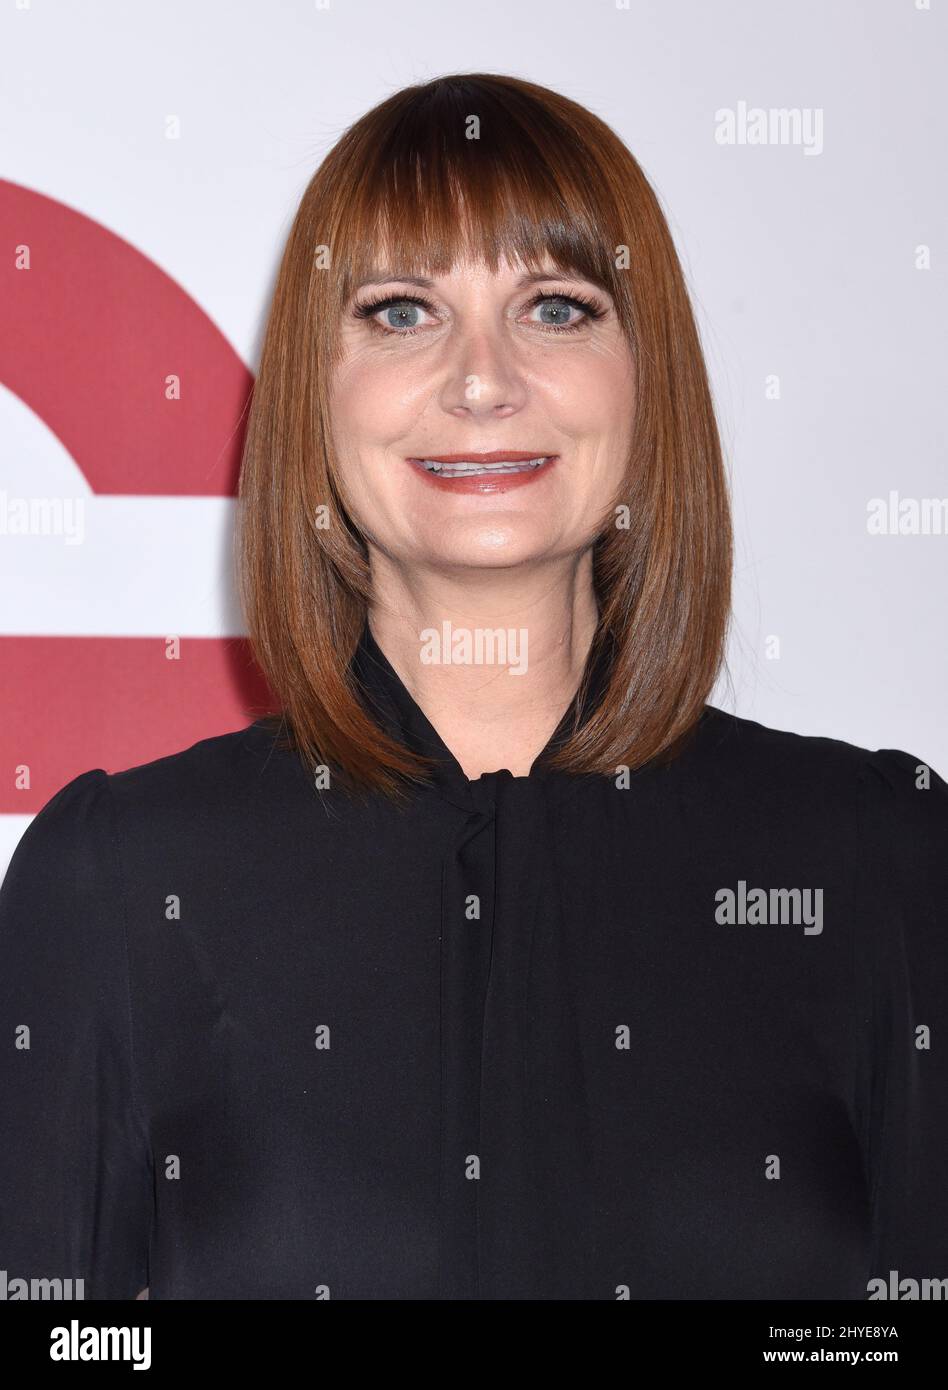 Kerri Kenney attending the premiere of Downsizing in Los Angeles, California Stock Photo